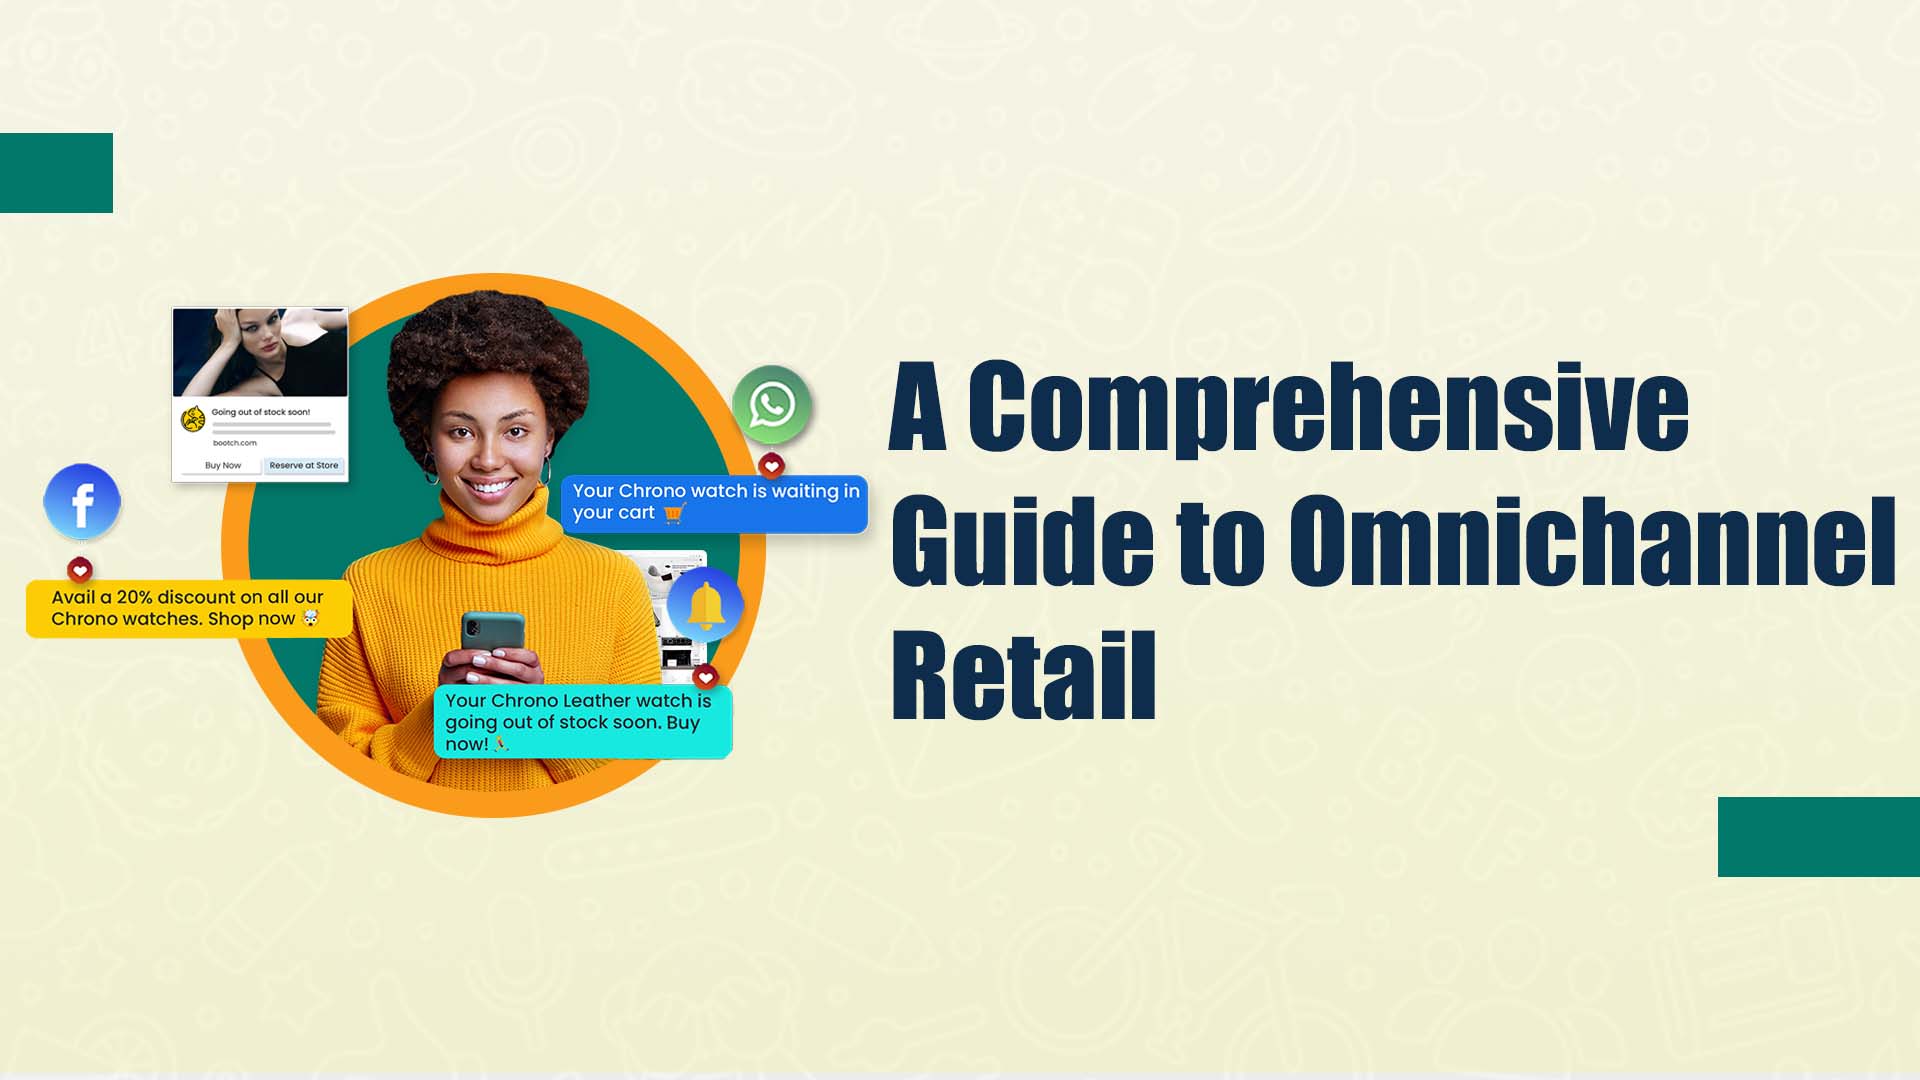 A Comprehensive Guide to Omnichannel Retail